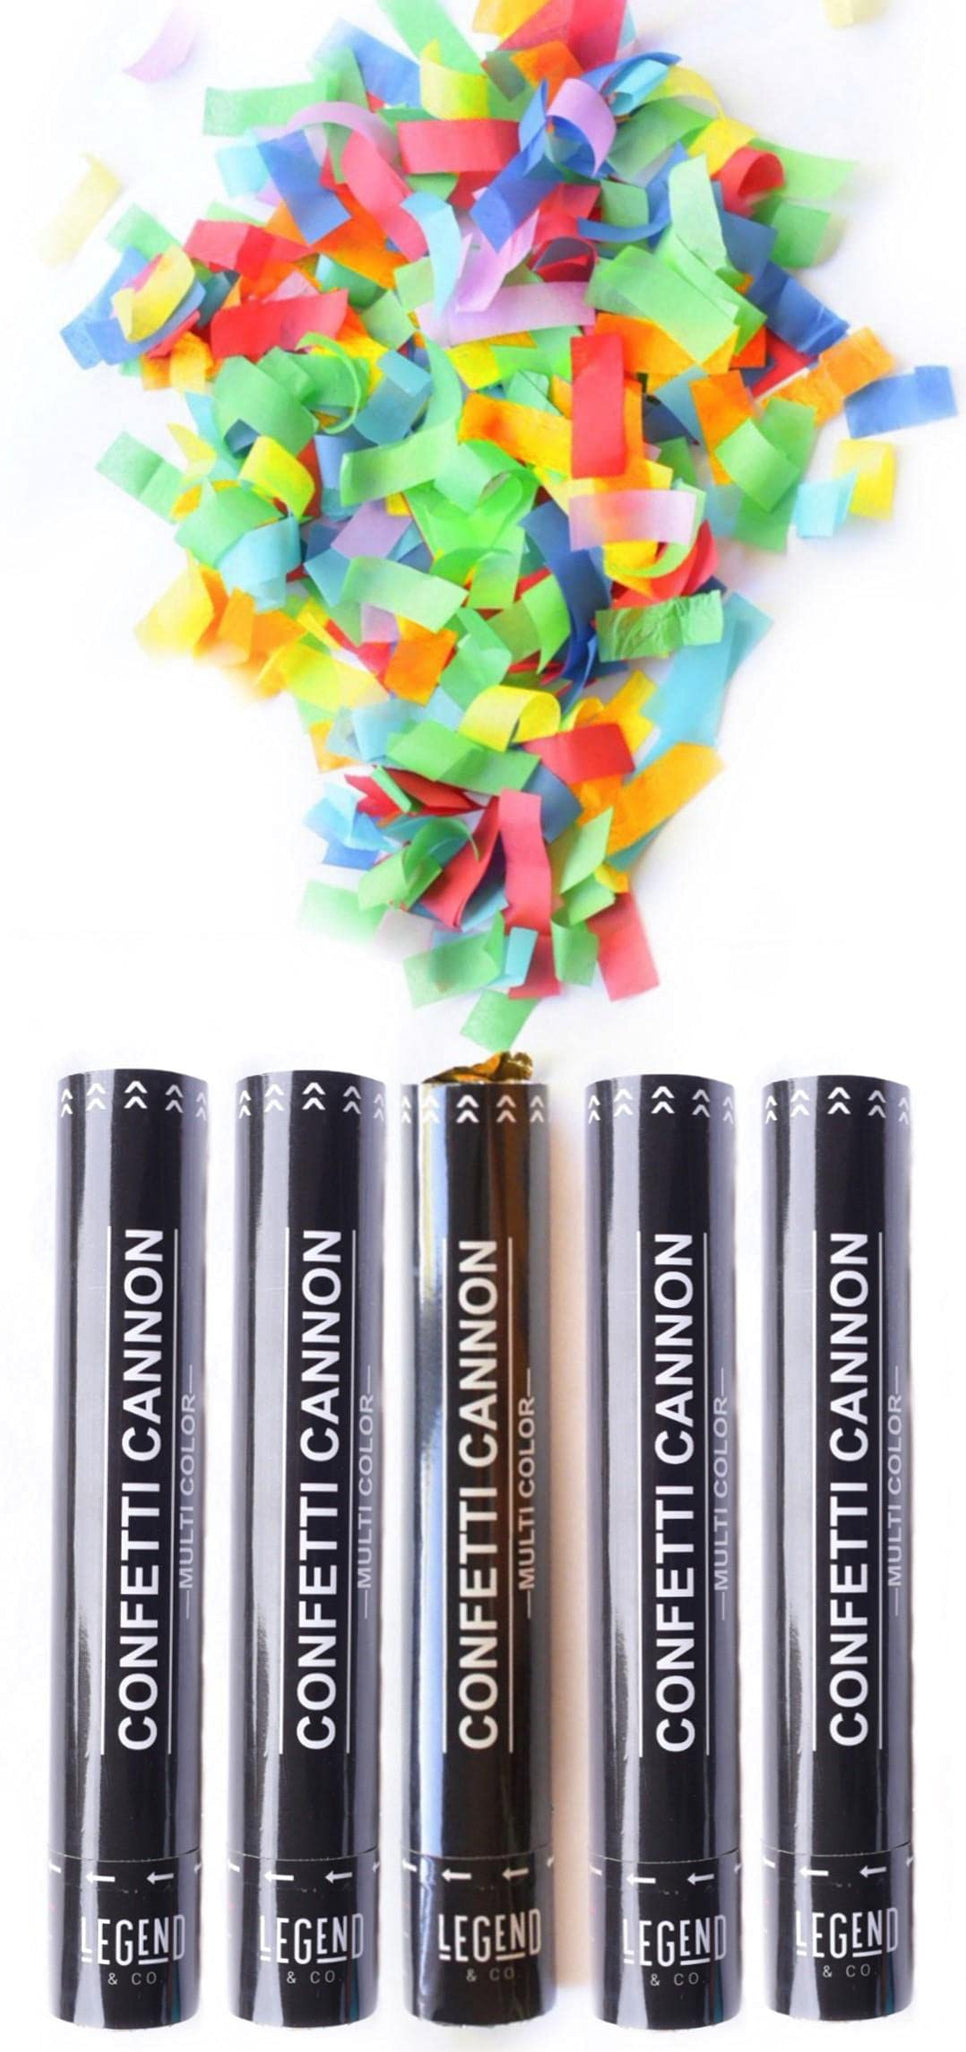 Legend & Co. Large Confetti Cannons Multicolor, (5 Pack) Biodegradable and Air Powered | Launches 20-25ft | Celebrations, New Year's Eve, Birthdays and Weddings